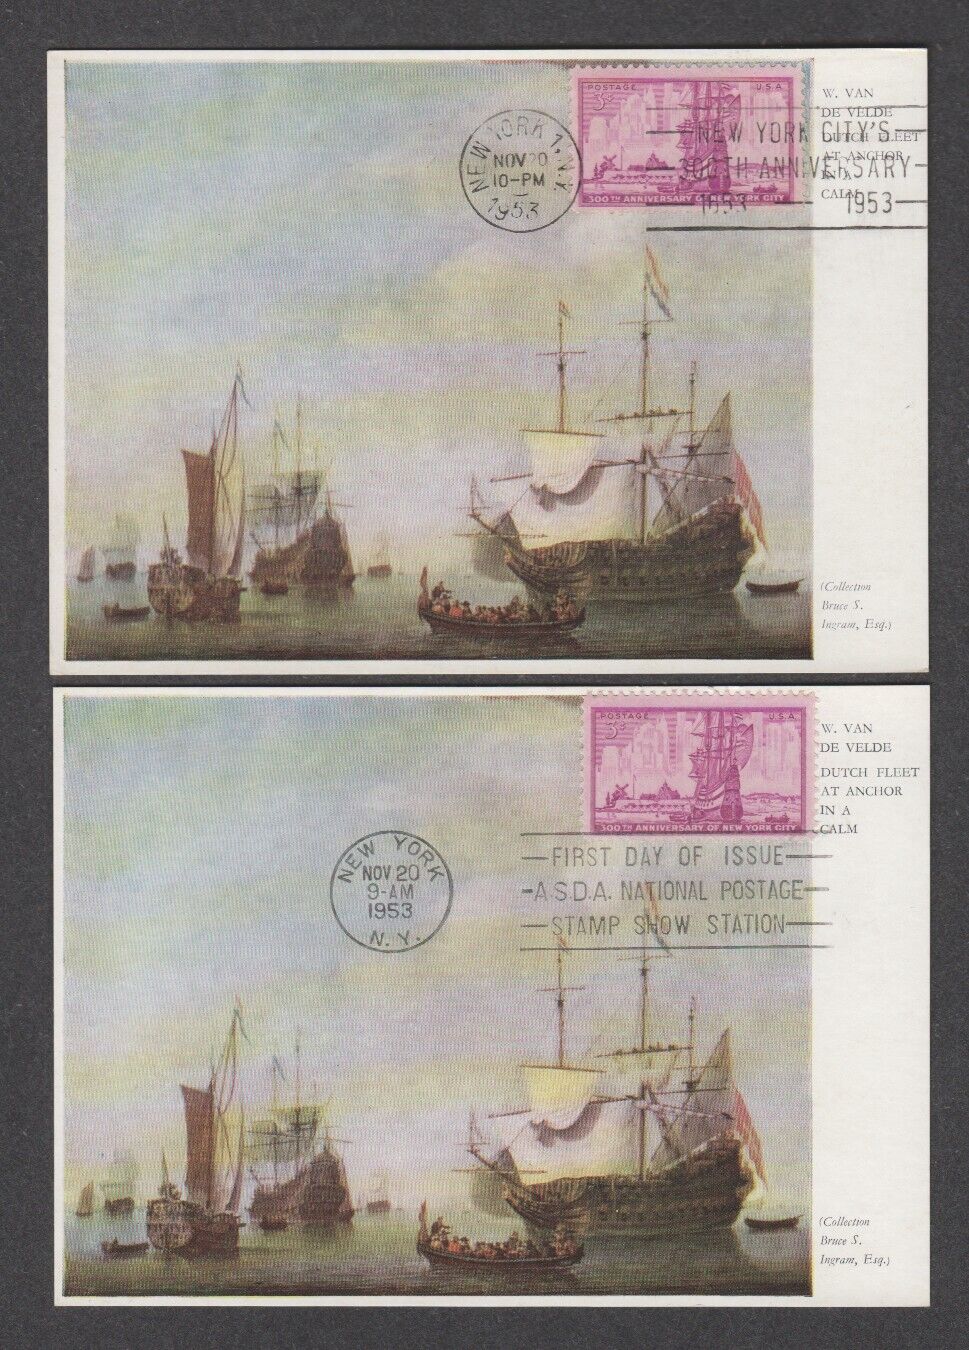 Us 1953 New York Anniversary Fdc Maximum Card Lot Of 2 - Different Cancels